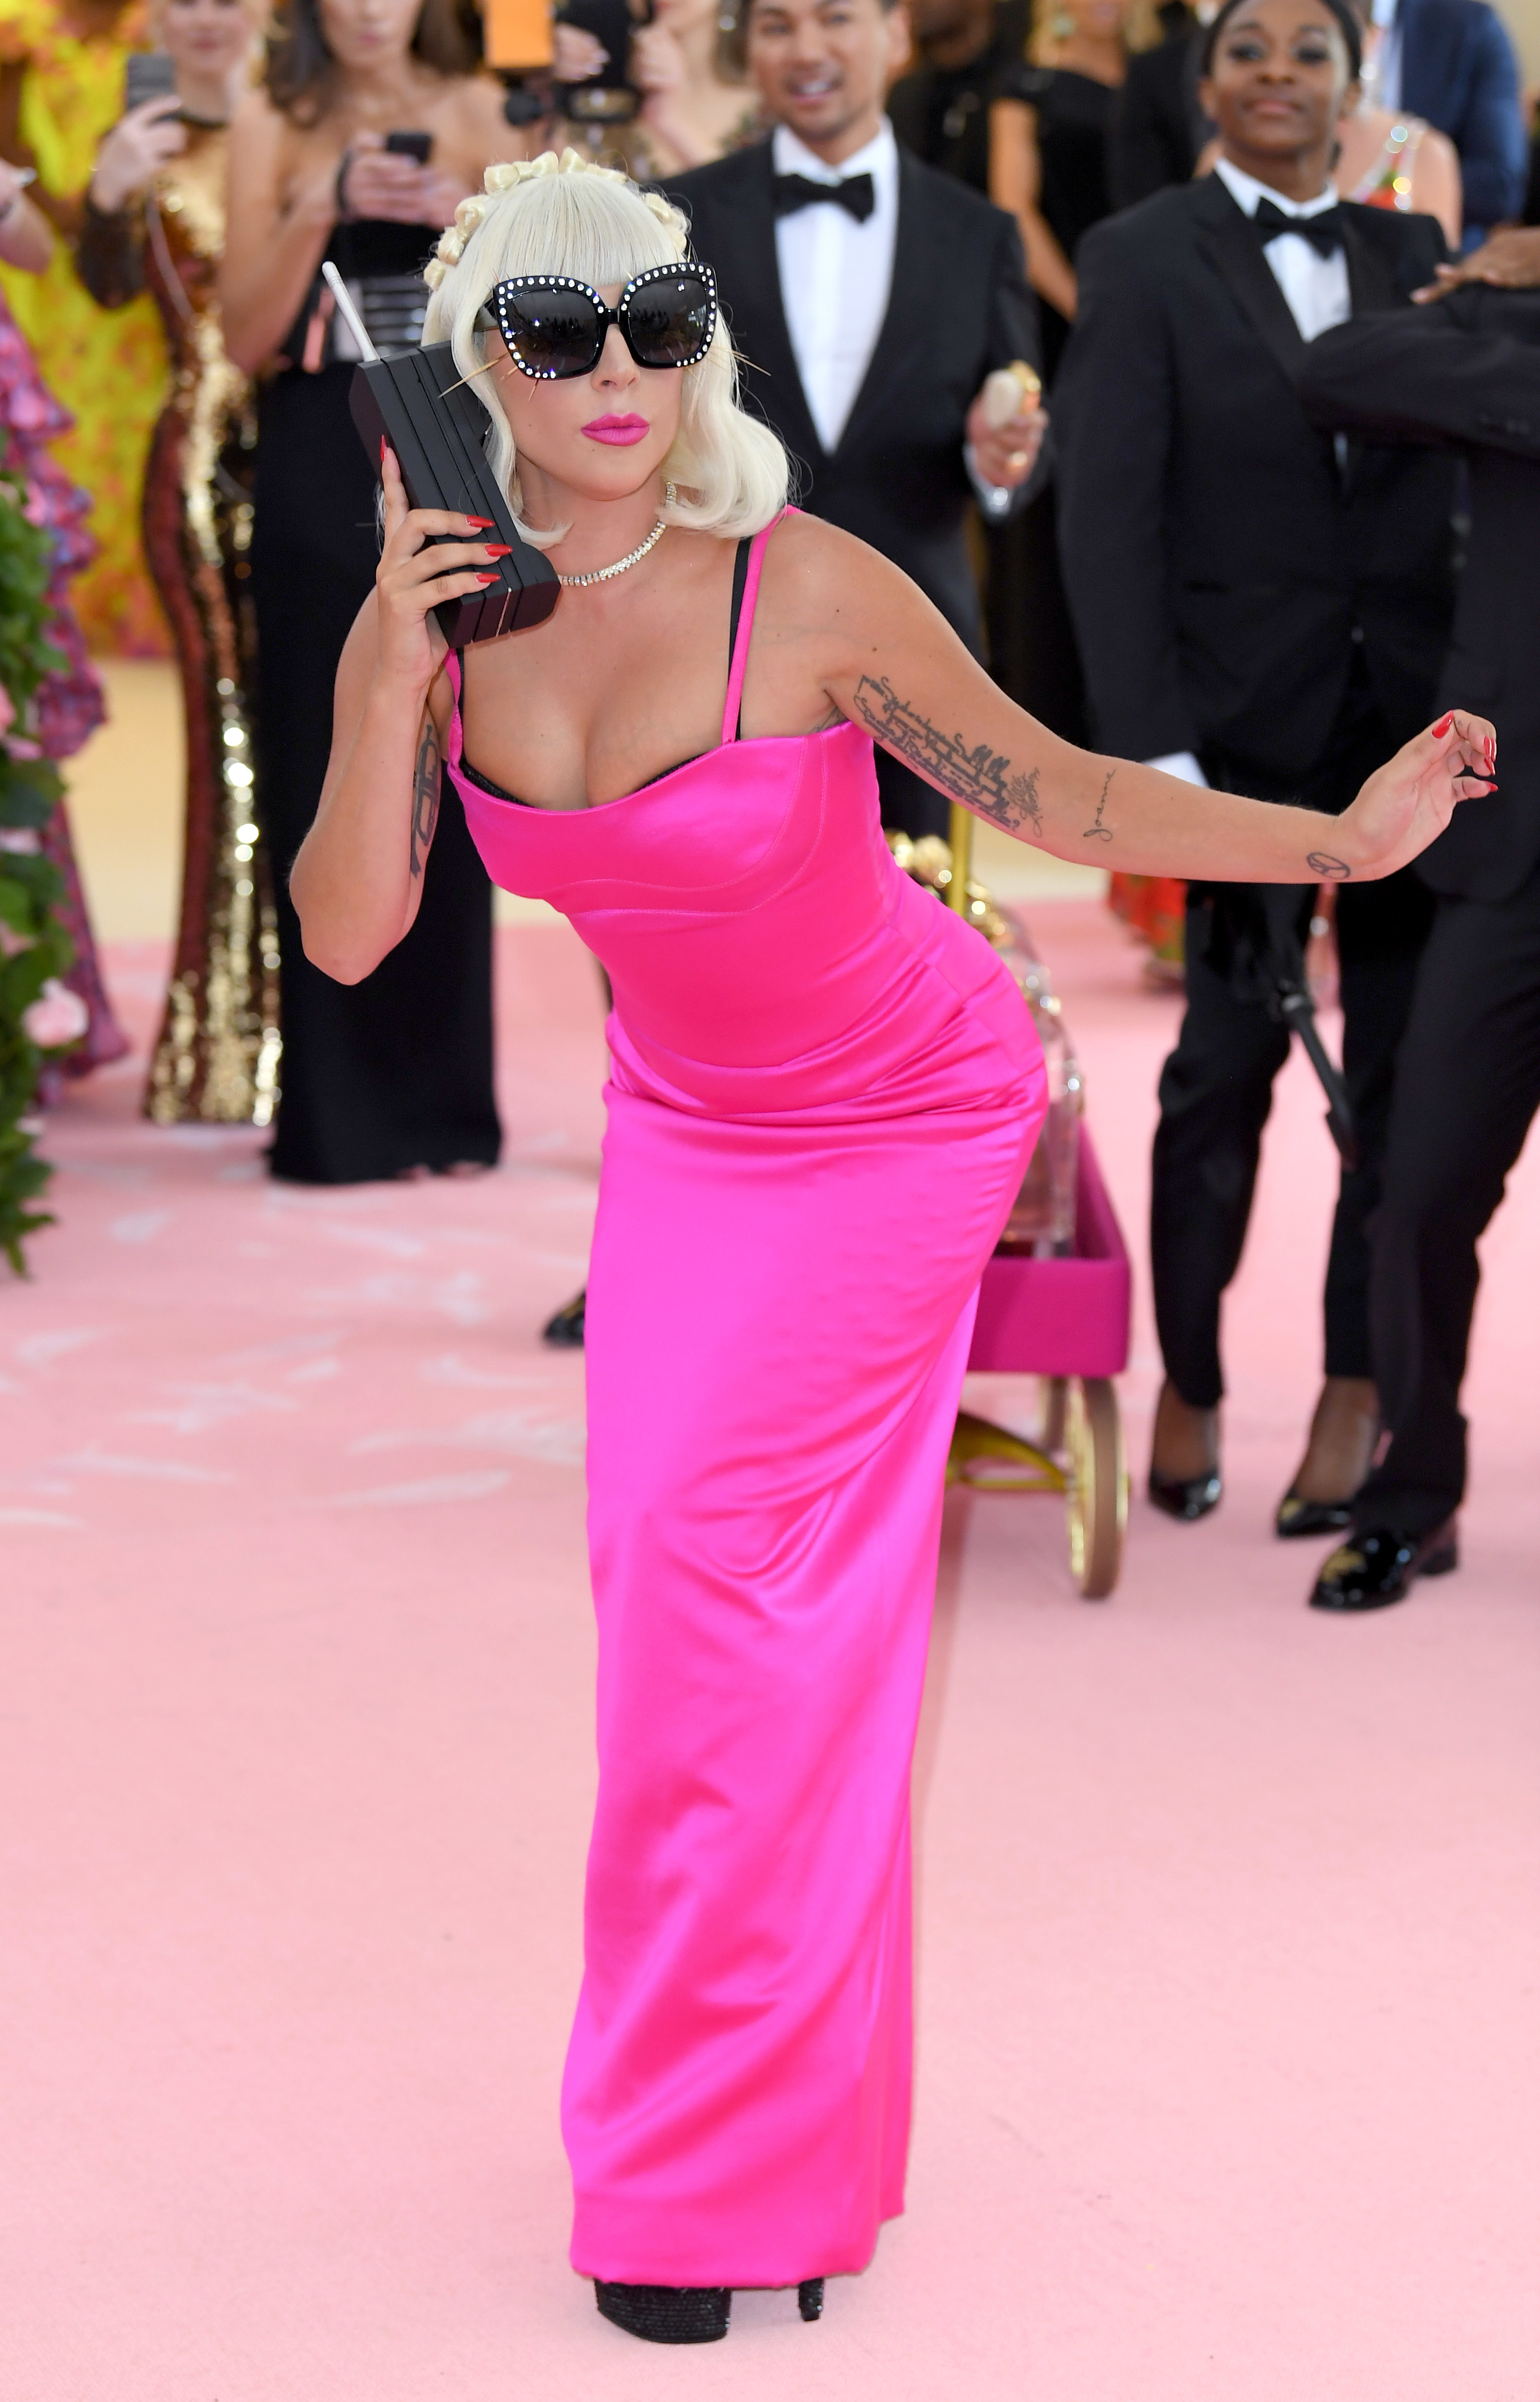 Lady Gaga in a column gown with a large phone prop,